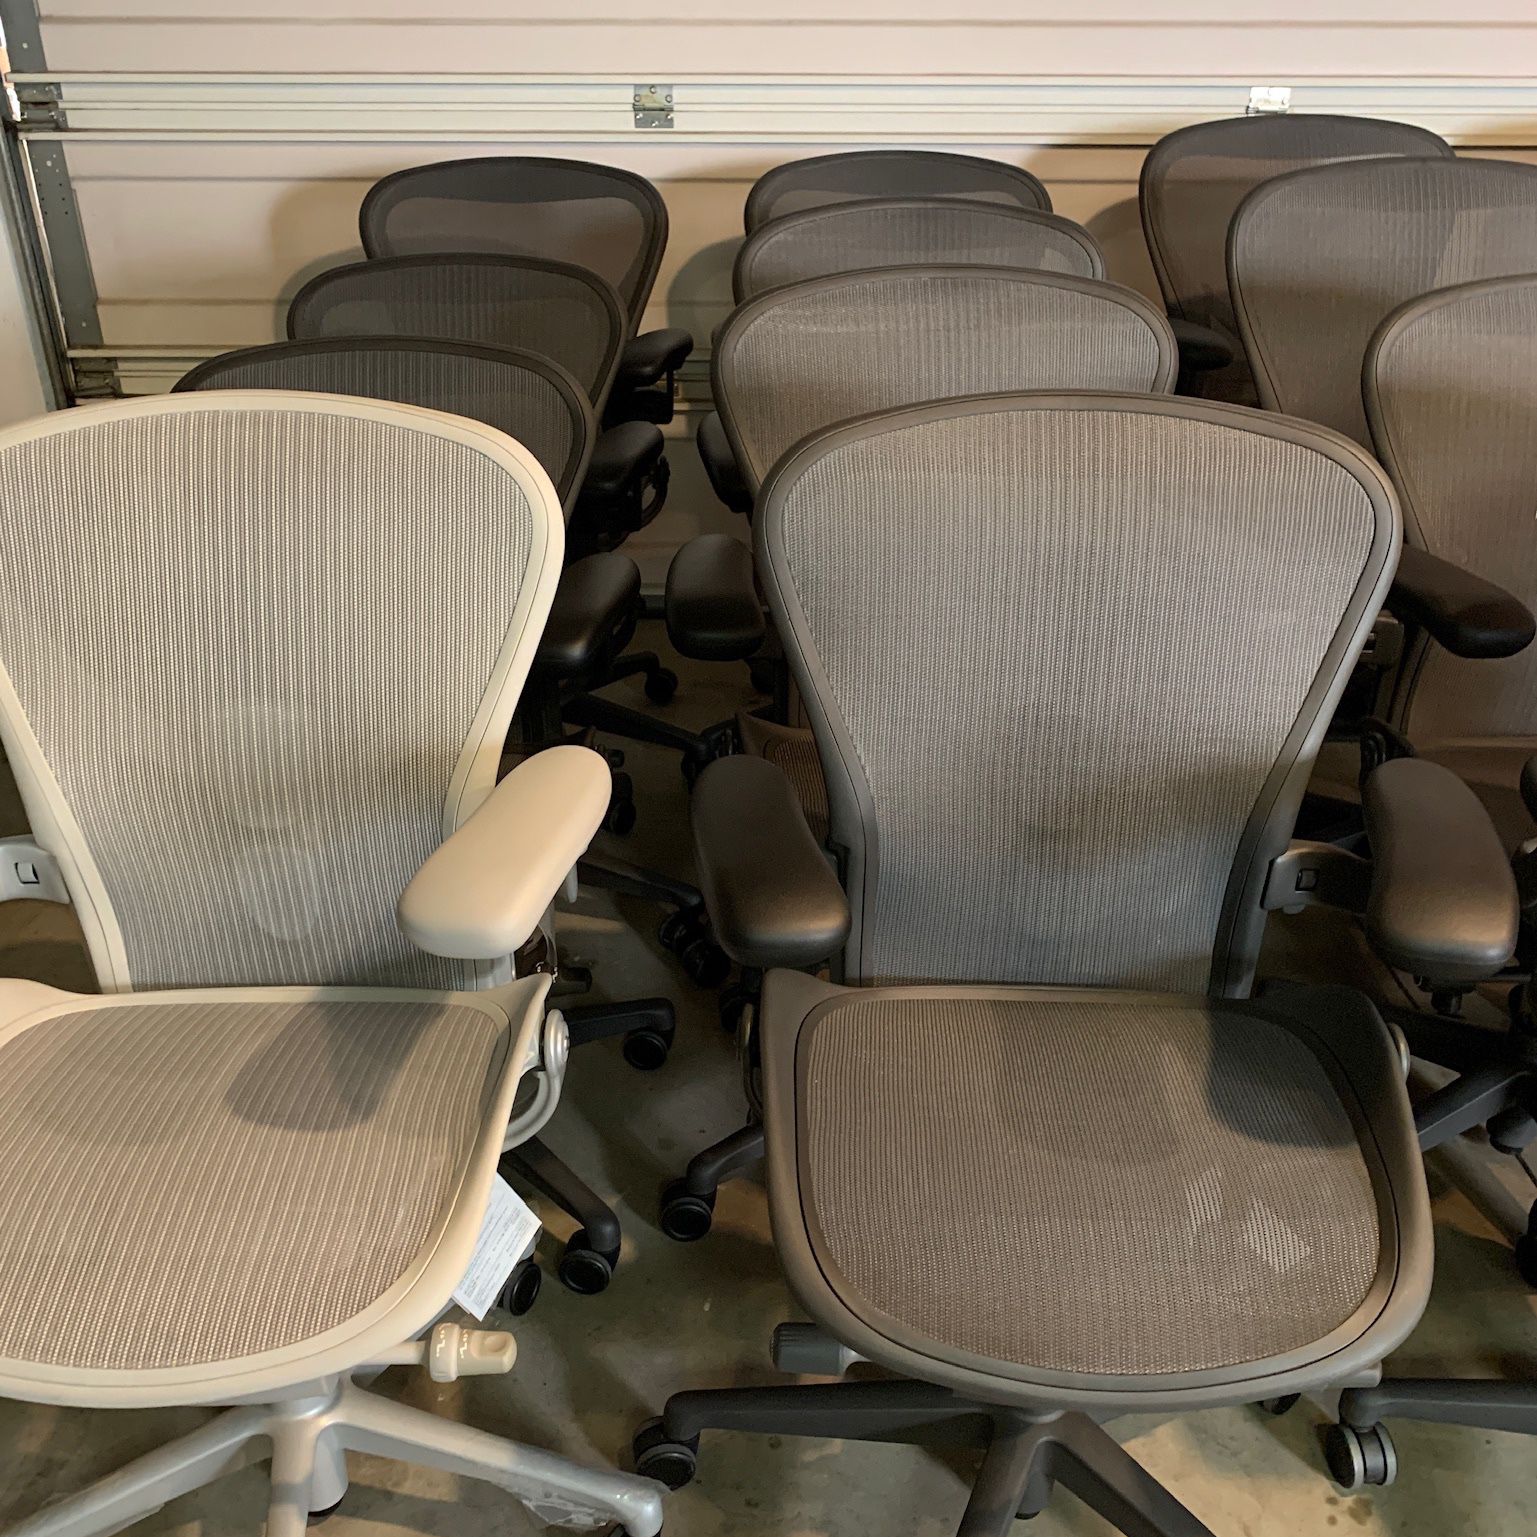 HUGE SELECTION of Herman Miller and Steelcase chairs for sale